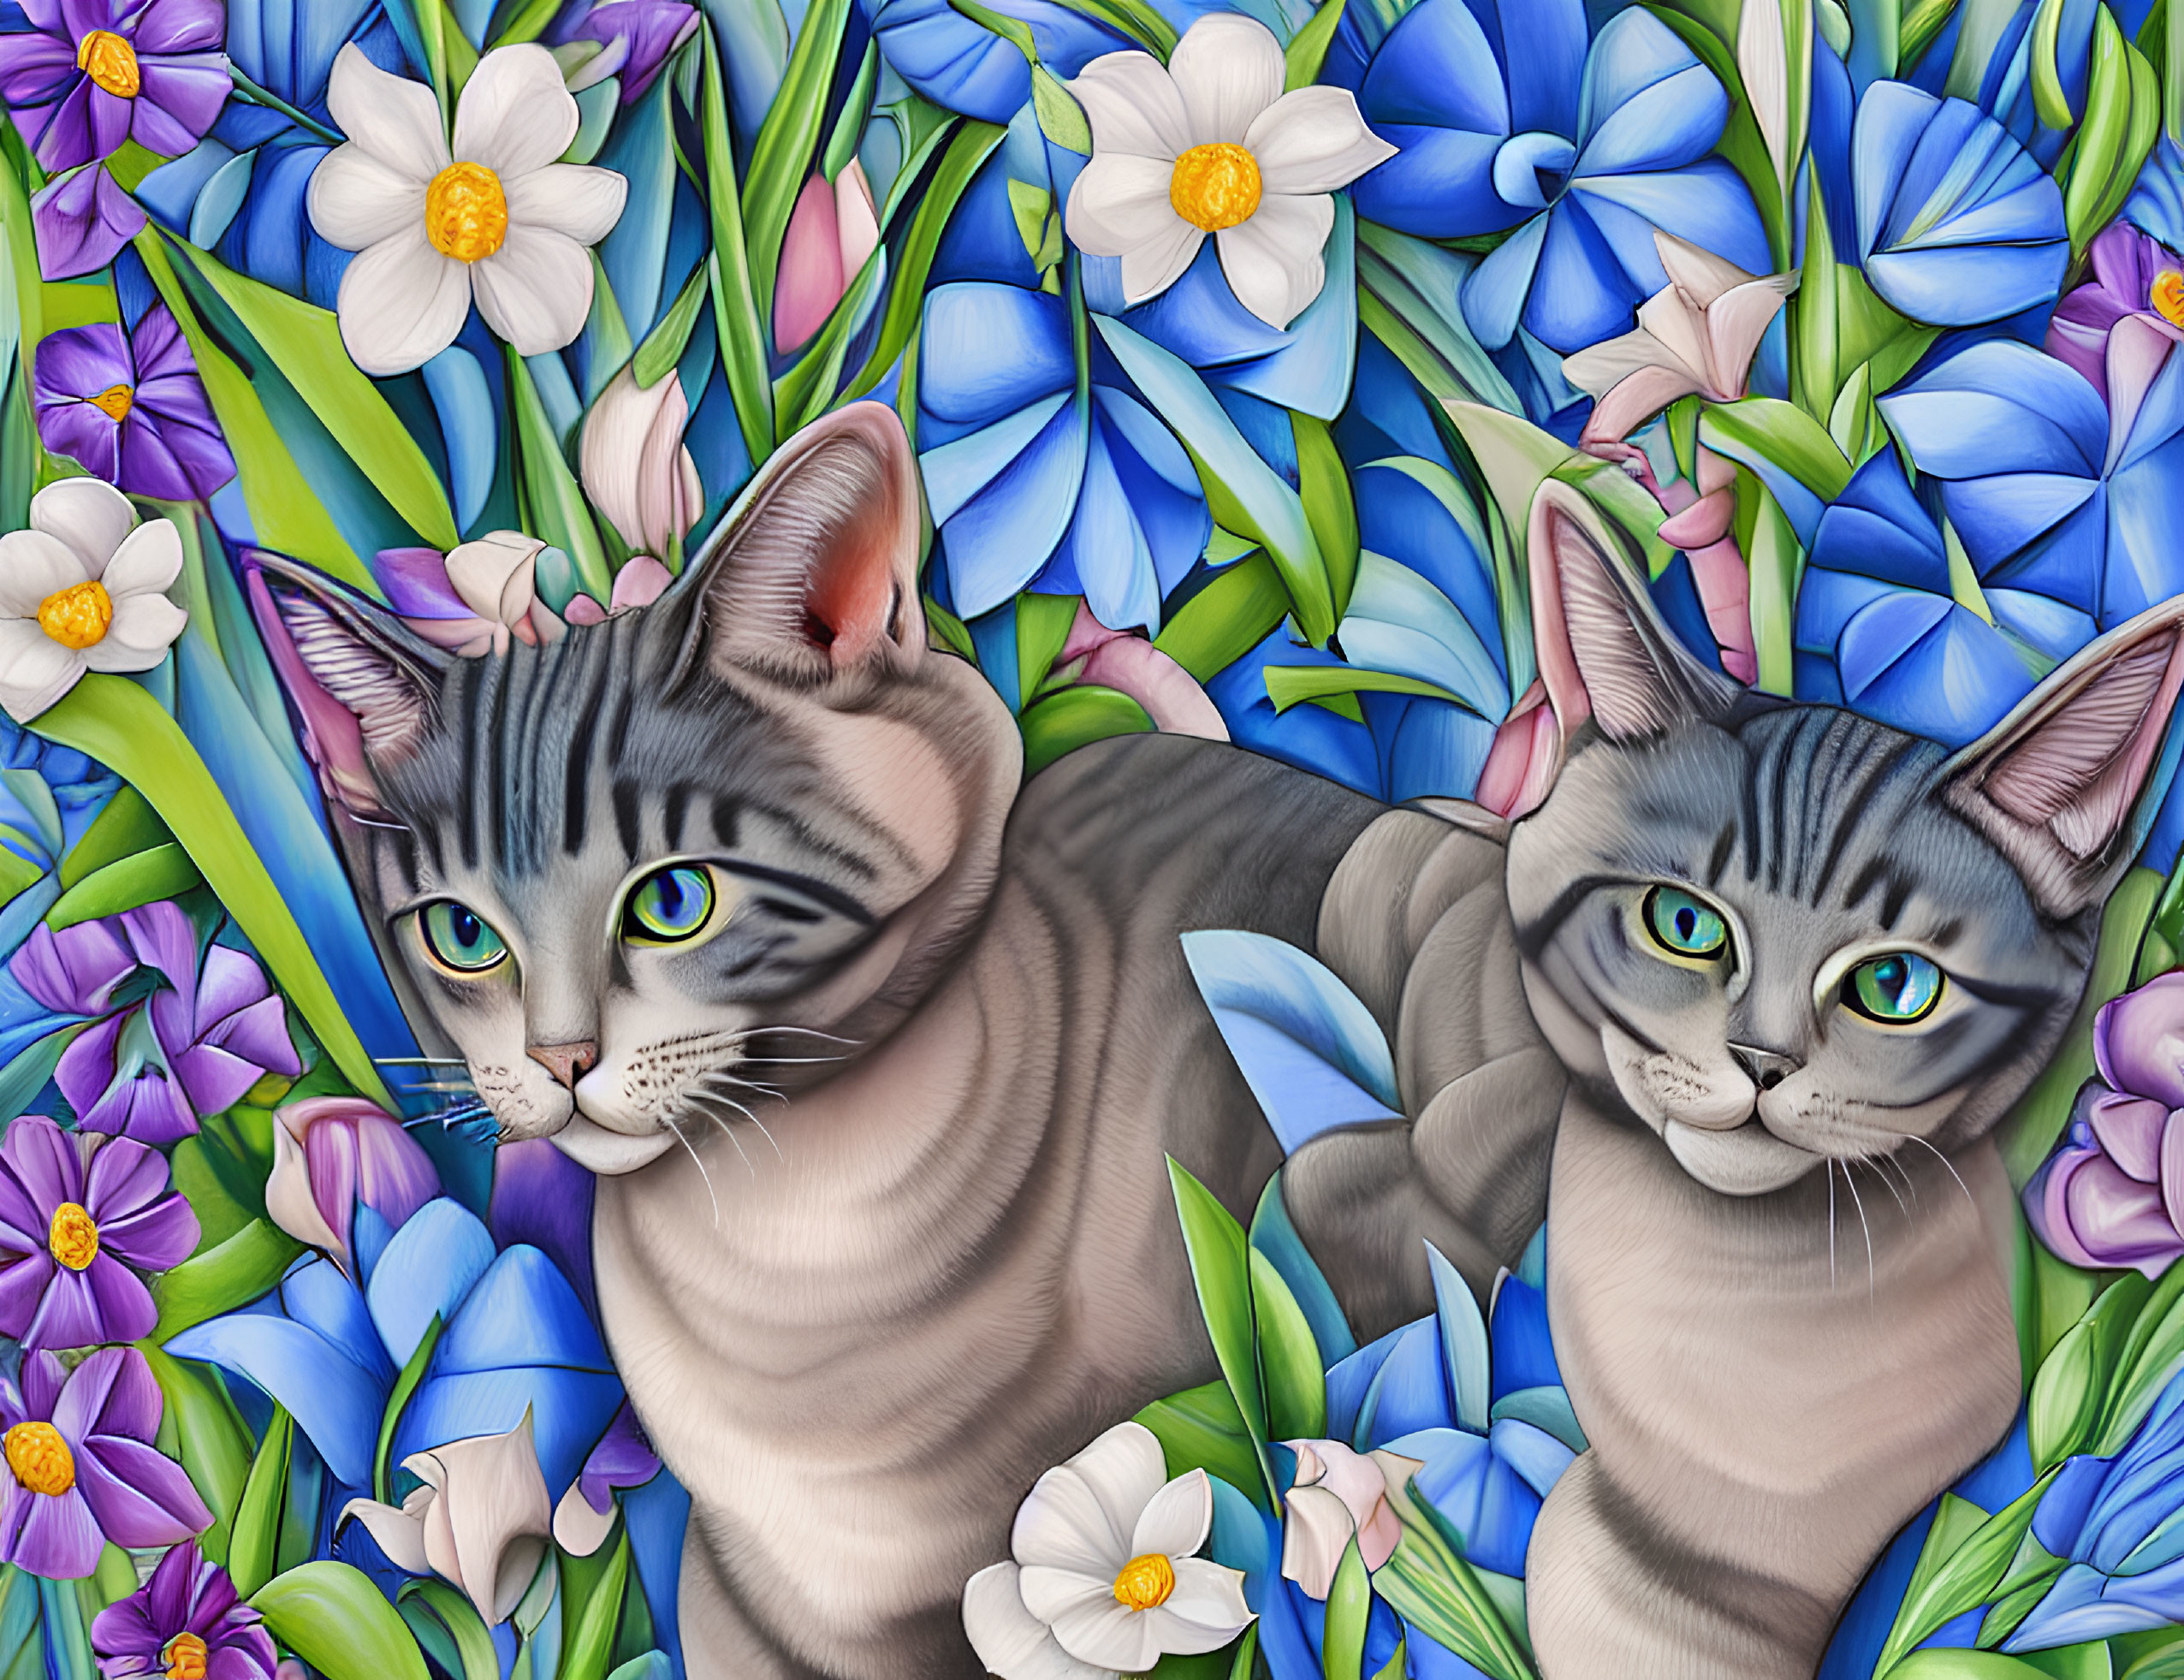 Illustrated grey tabby cats with green eyes in blue and white floral setting